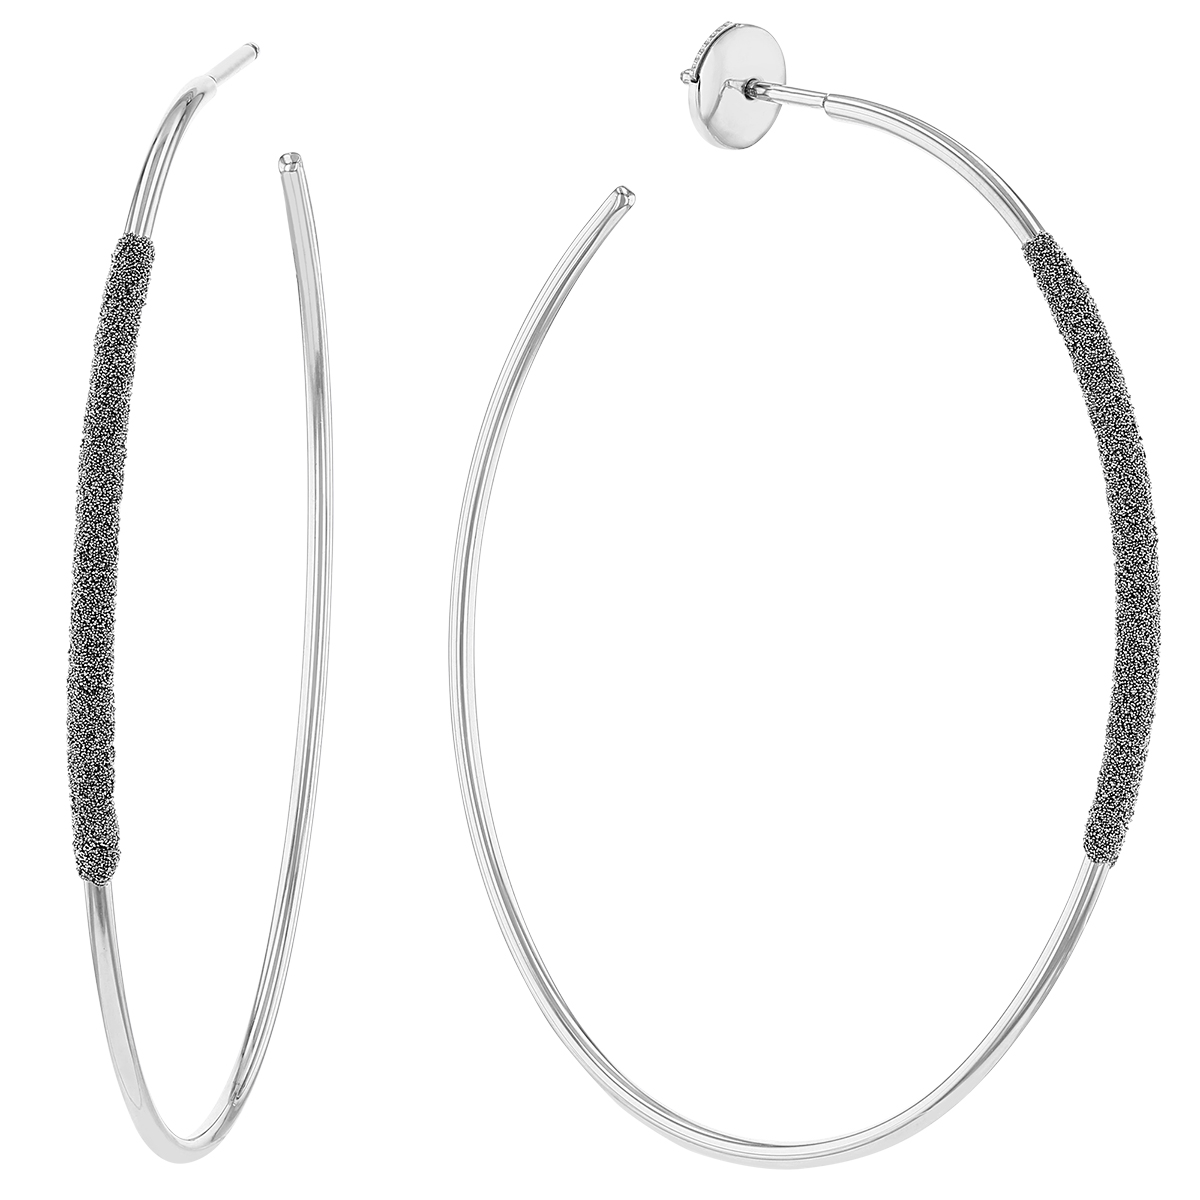 Pesavento Diamanti Large Oval Earrings in 18K White Gold with Storm ...